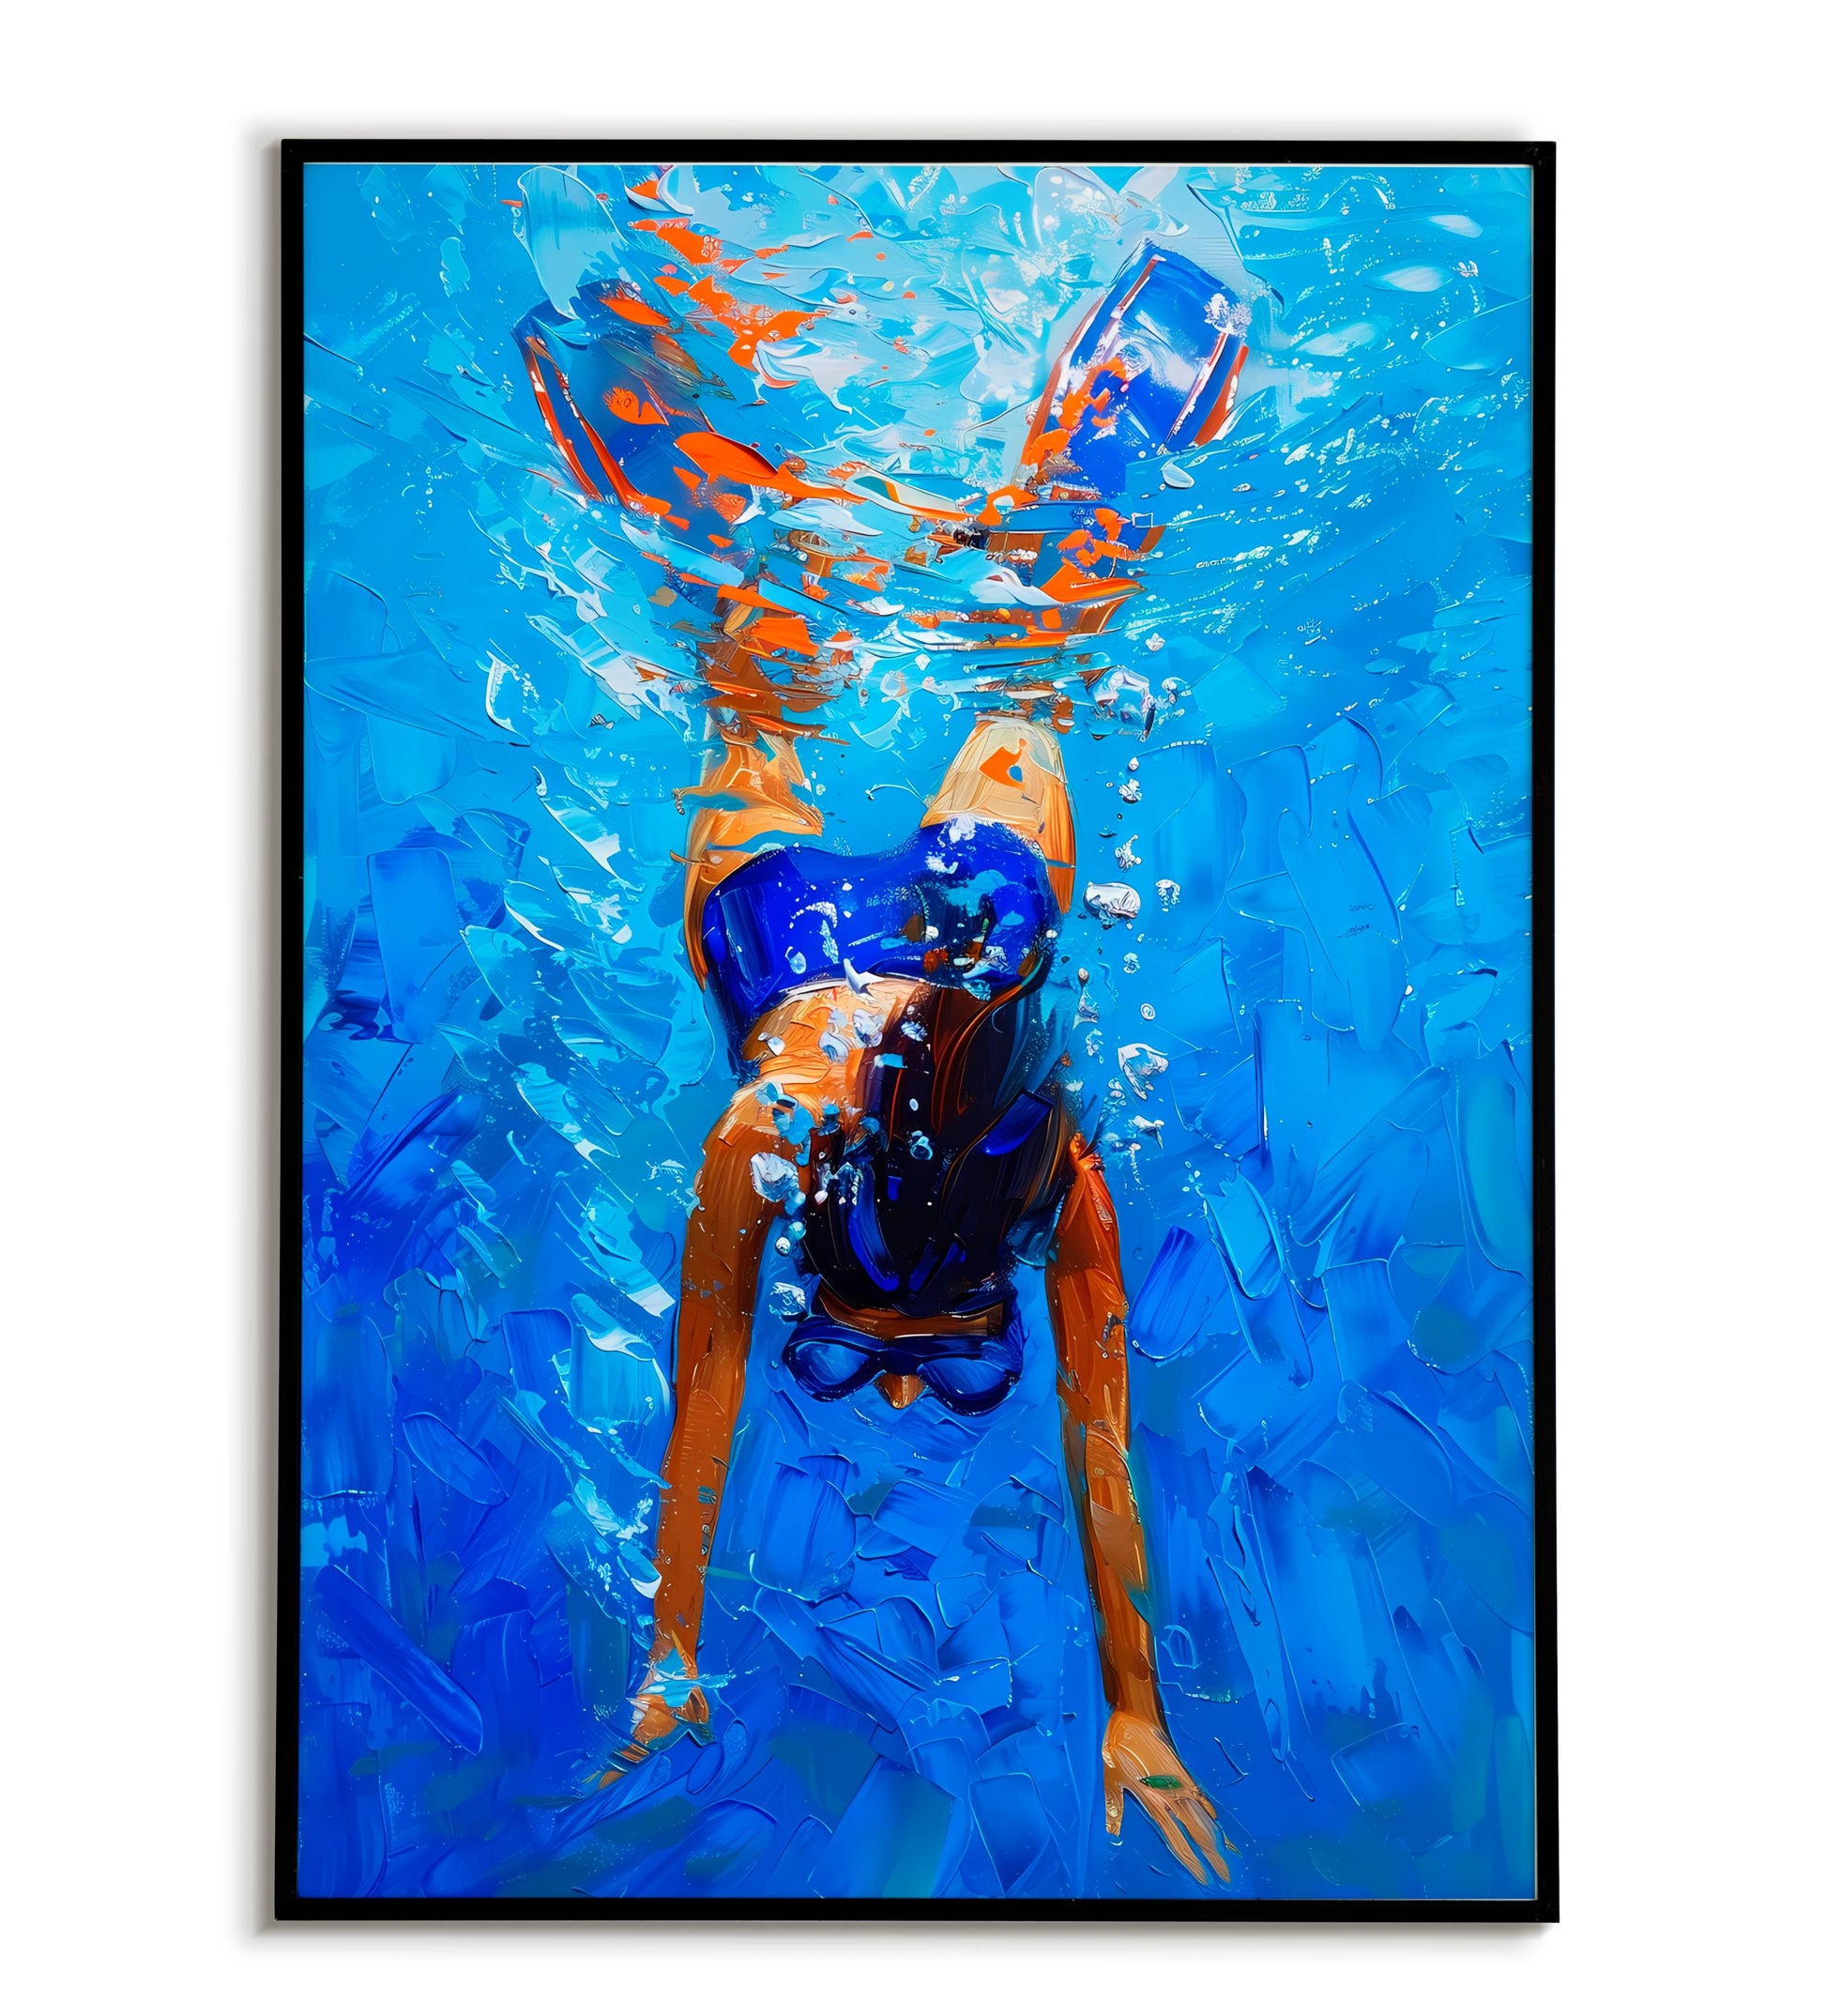 Diving Girl" abstract figurative poster